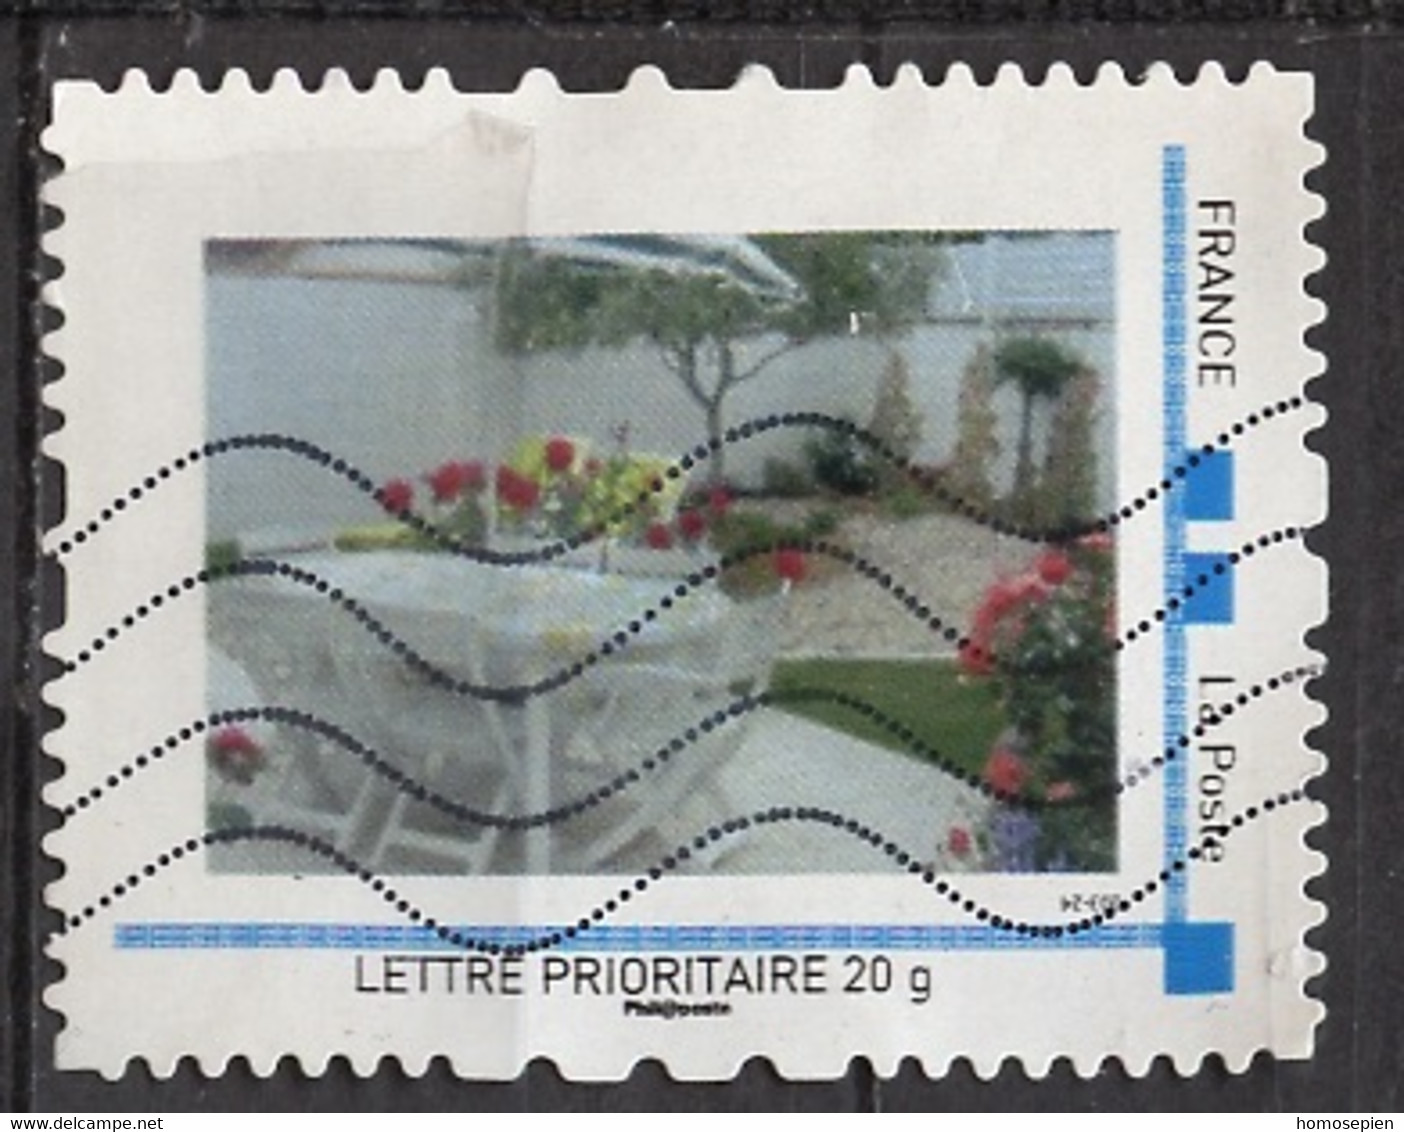 France - Frankreich Timbre Personnalisé 2007 Y&T N°MTAM01-004 - Michel N°BS(?) (o) - Table De Jardin - Used Stamps